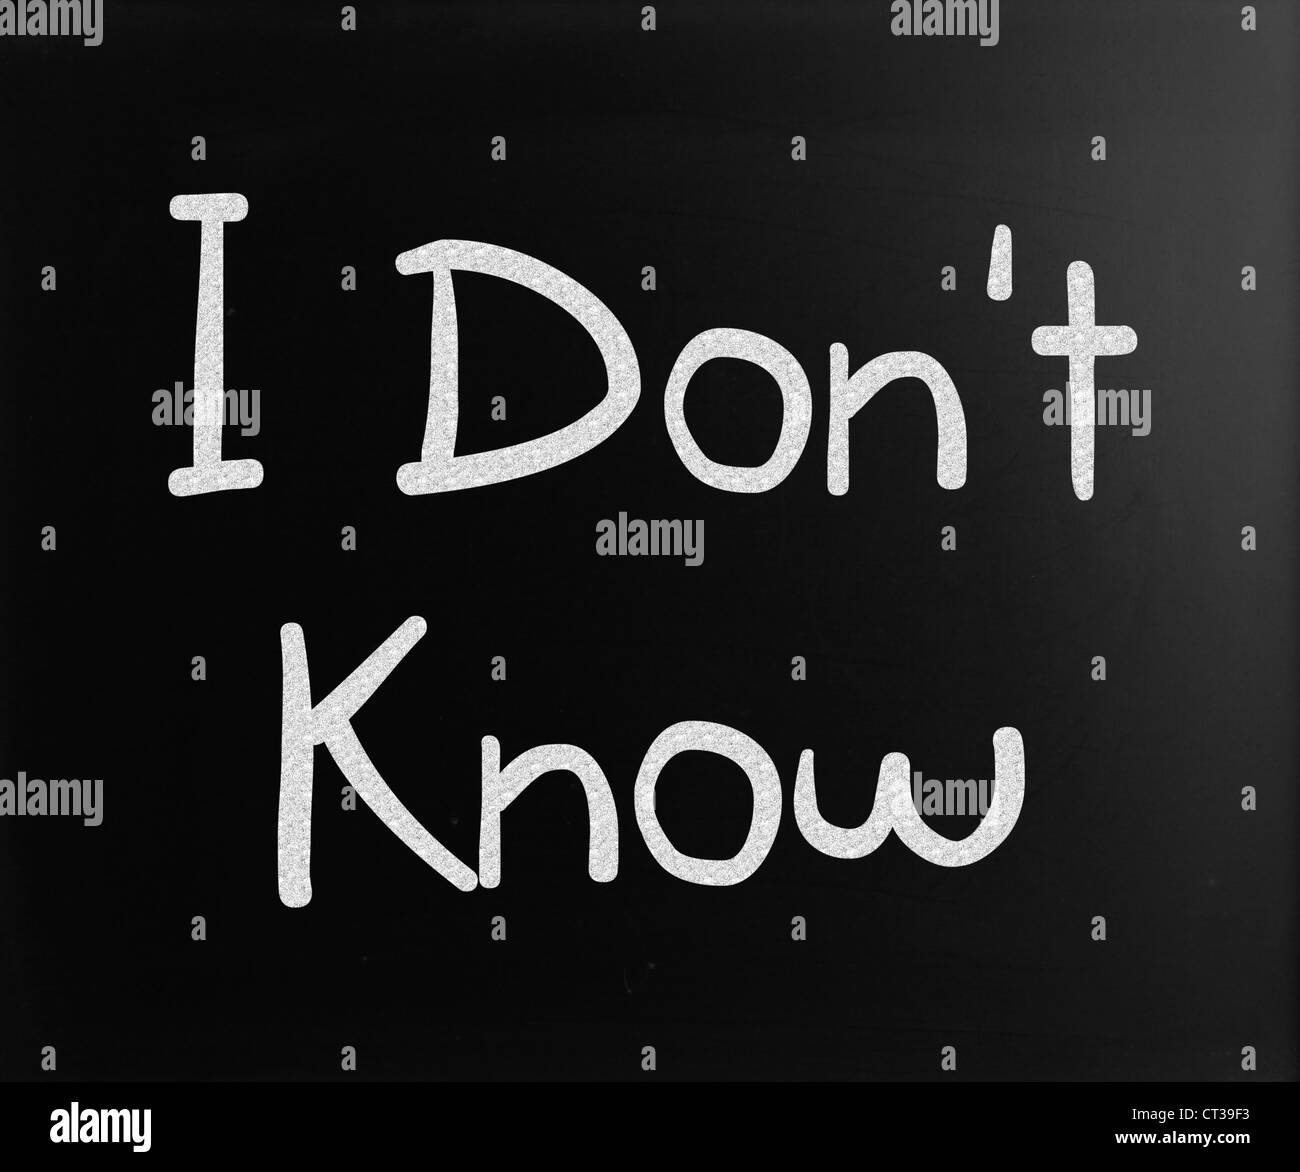 I don t know enough. I don't know надпись. Картинка i don't know. Обои с надписью i don't. I dont know i don't know i don't know.